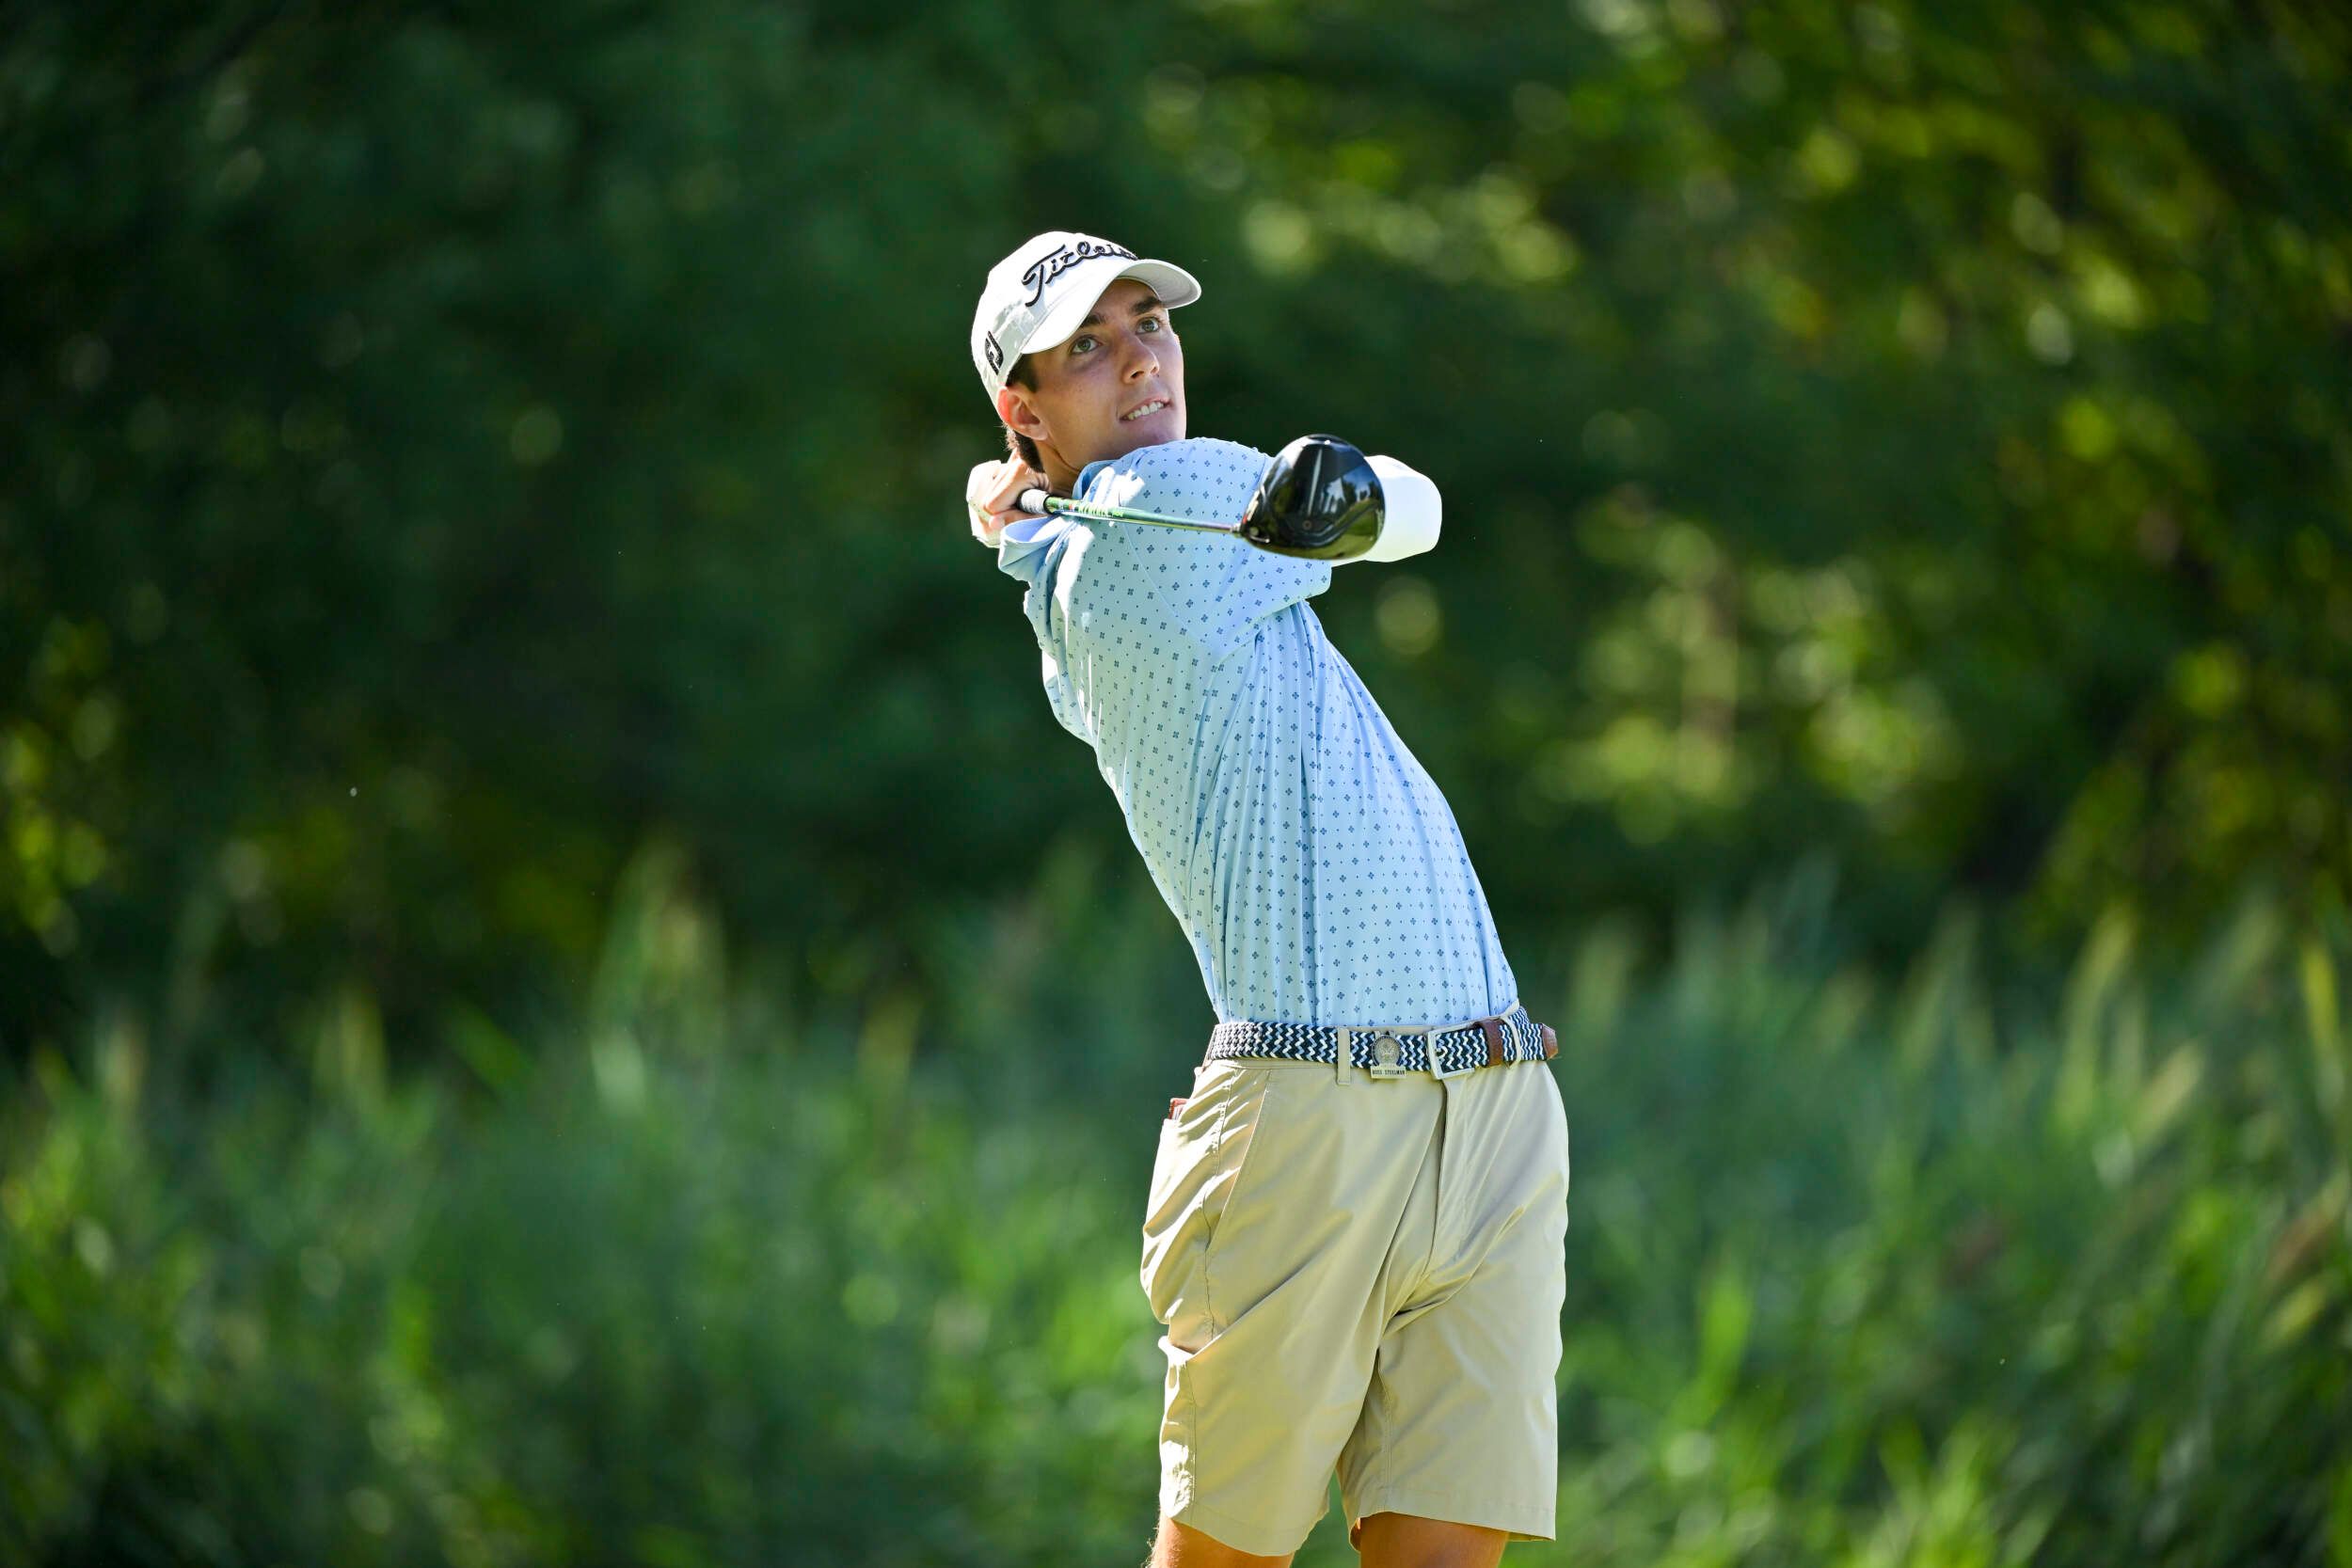 All Three Jackets Advance to Match Play at picture